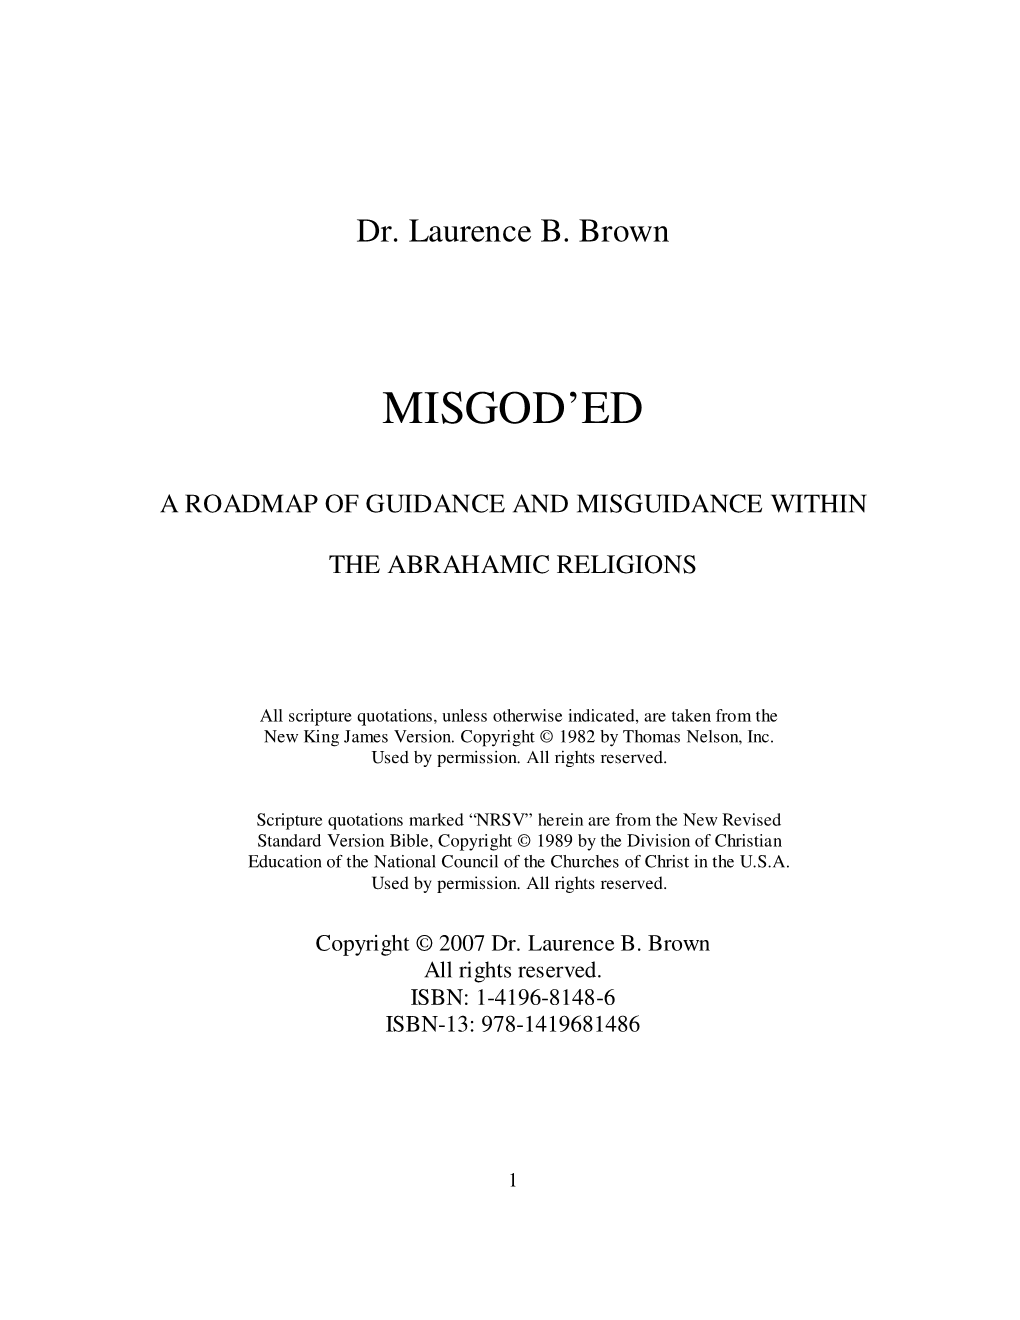 Misgod'ed. a Roadmap of Guidance and Misguidance Within the Abrahamic Religions